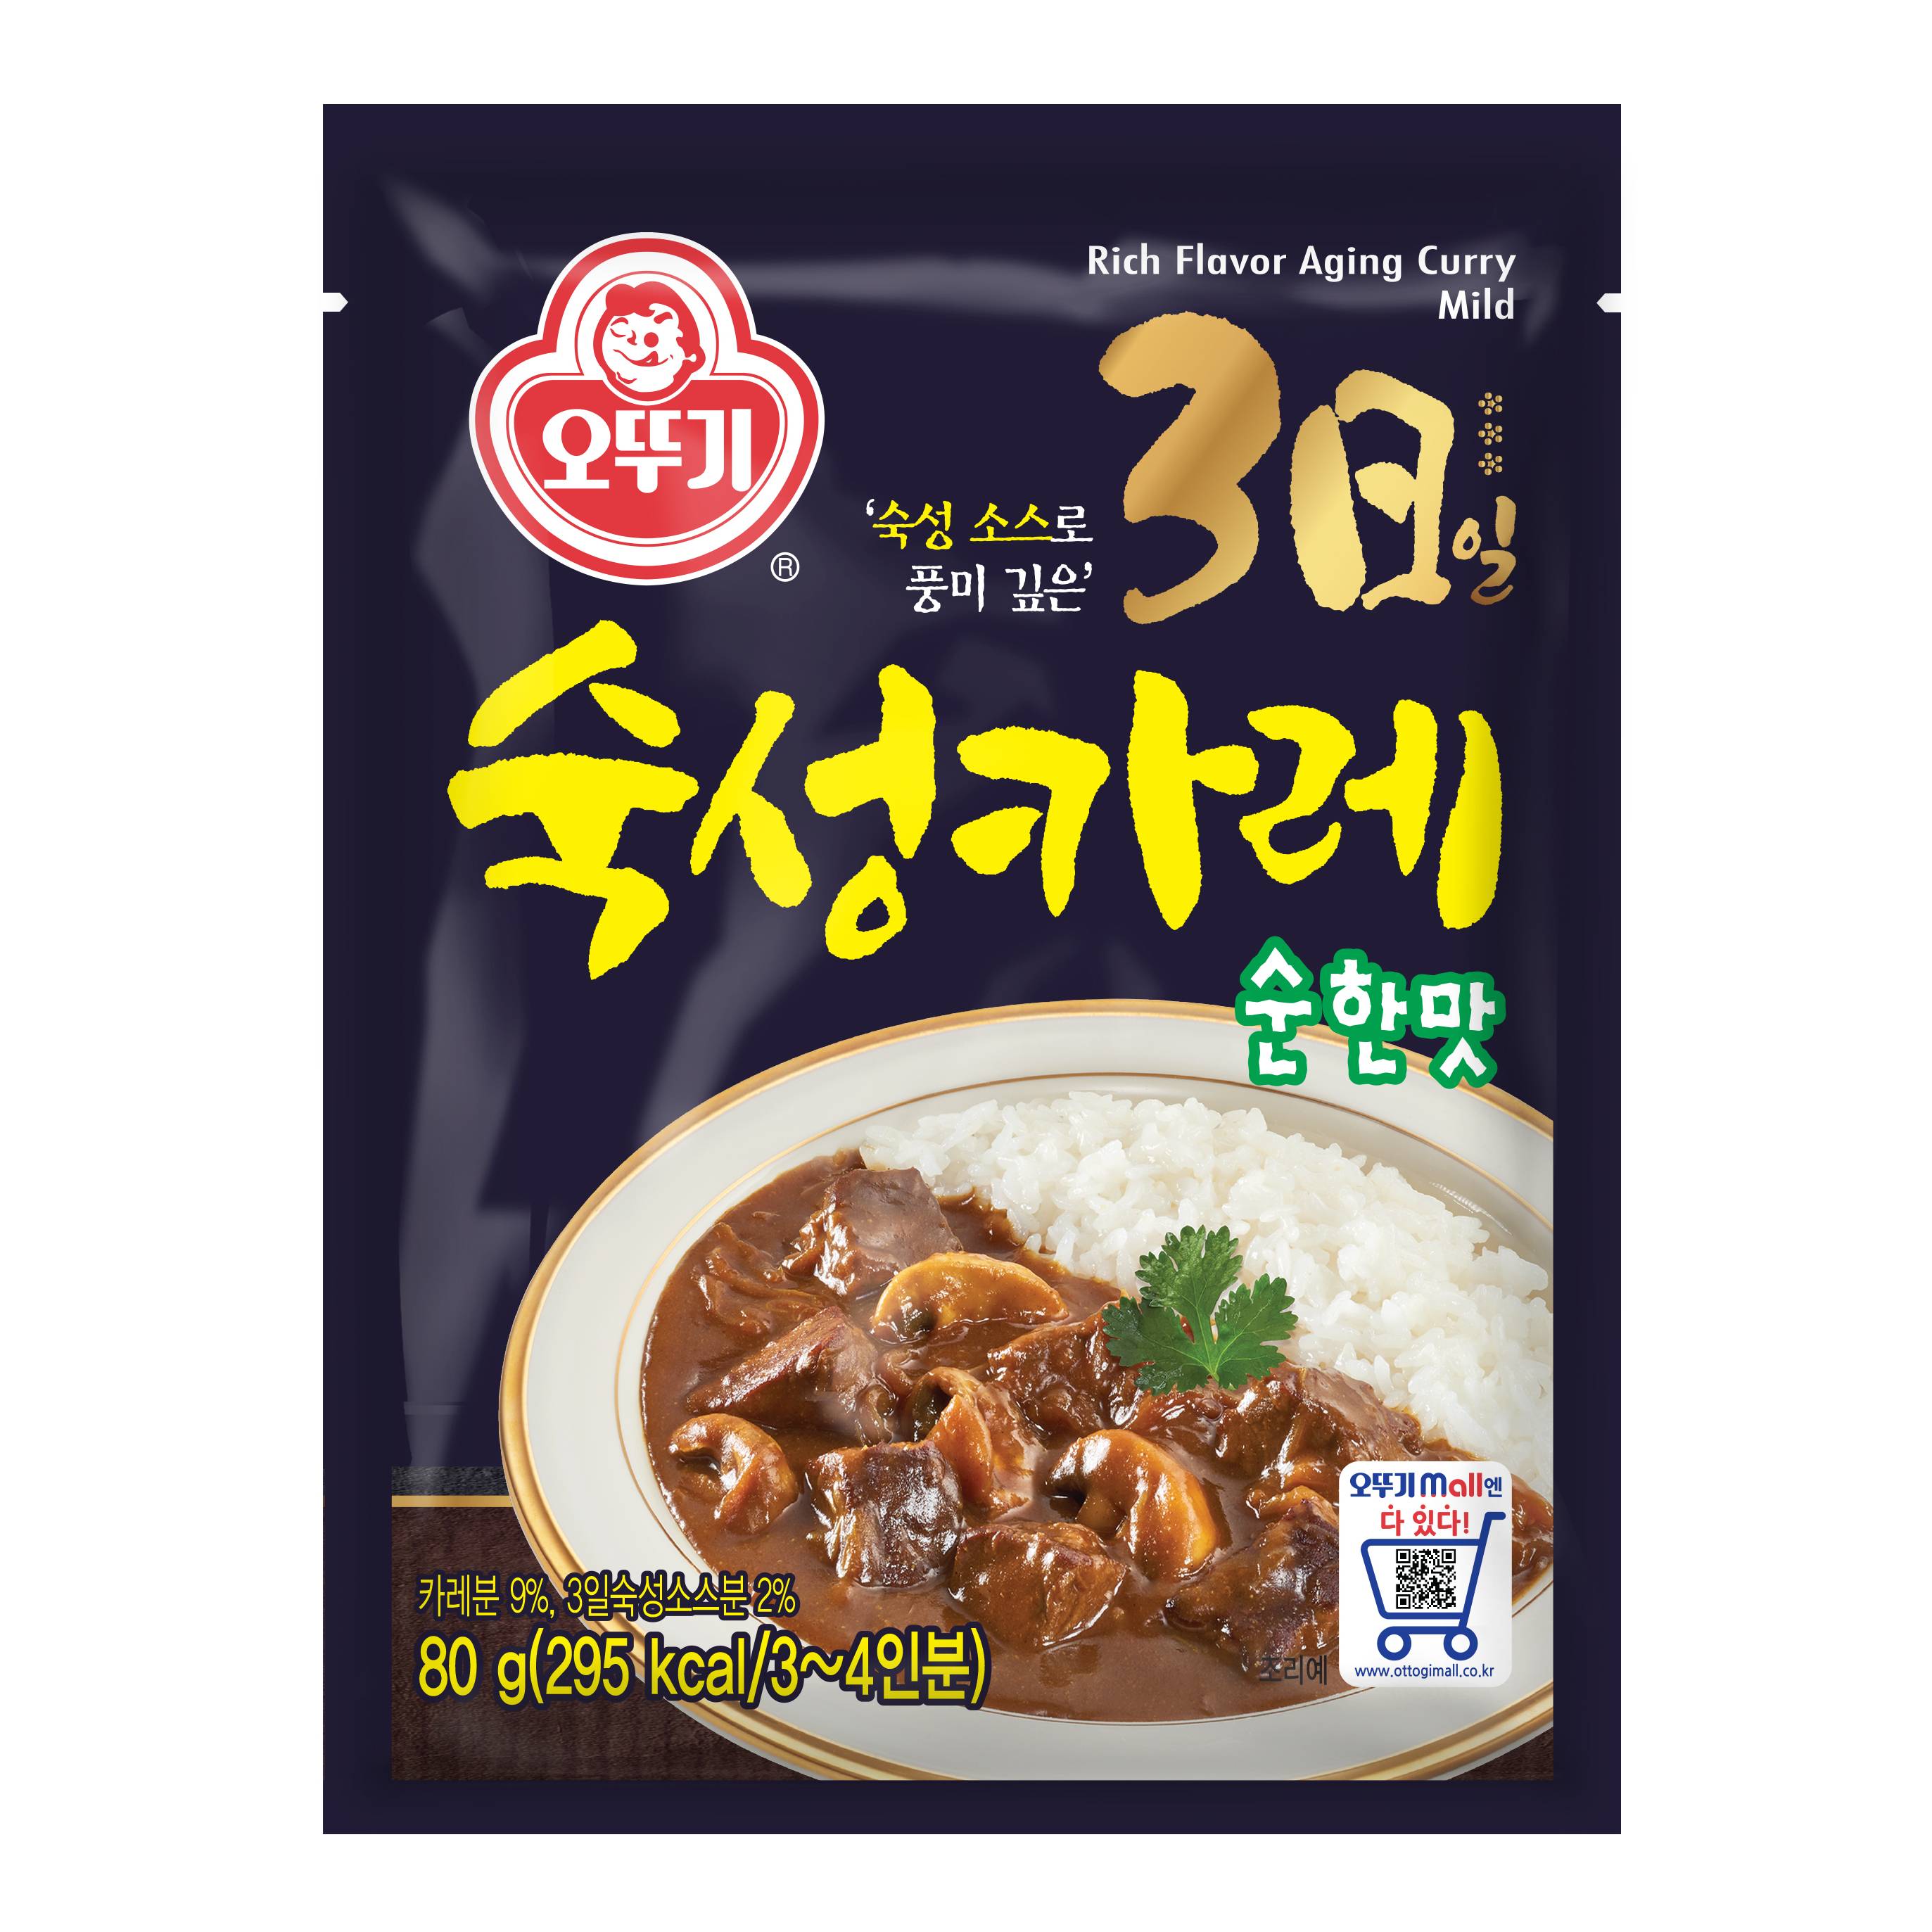 RICH FLAVOR AGING CURRY MILD